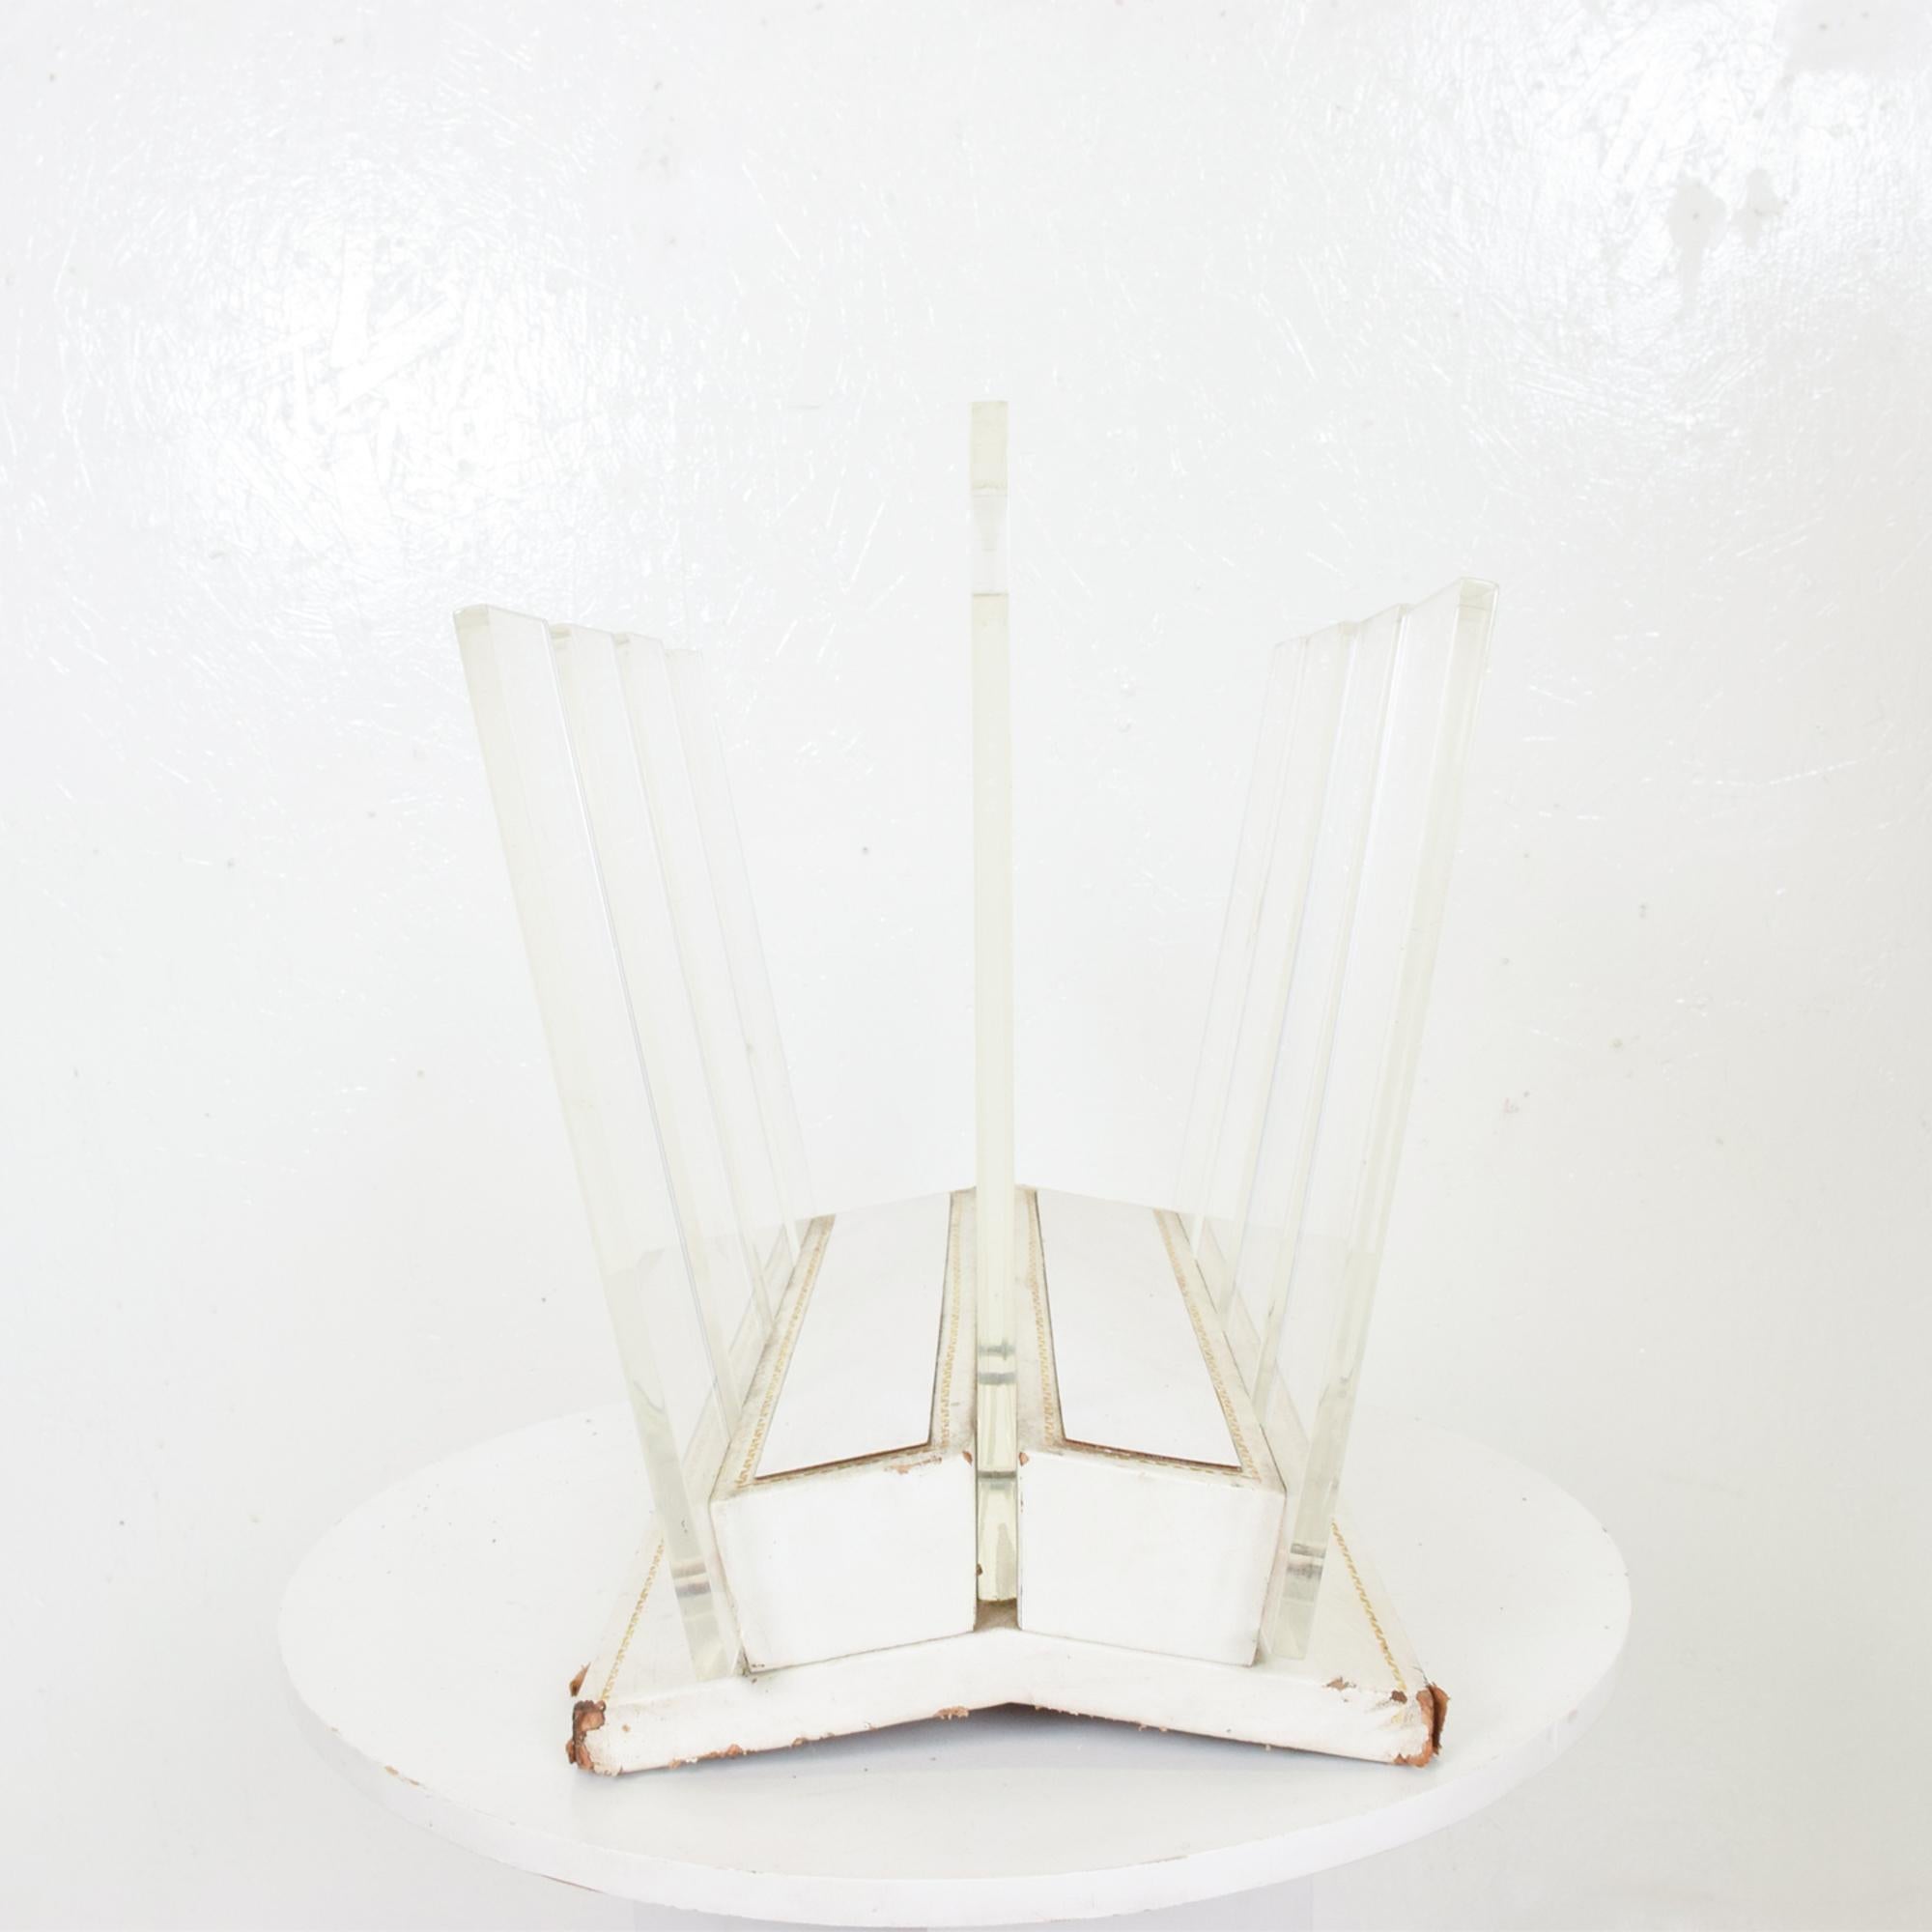 Charming vintage Lucite and leather modern magazine rack holder hand carry, 1970s
Style of Hollywood Regency Modern Charles Hollis Jones Era. No label apparent.
Thick Lucite on vintage aged Leather. Gold accent nail heads.
Dimensions: 14.5 T x